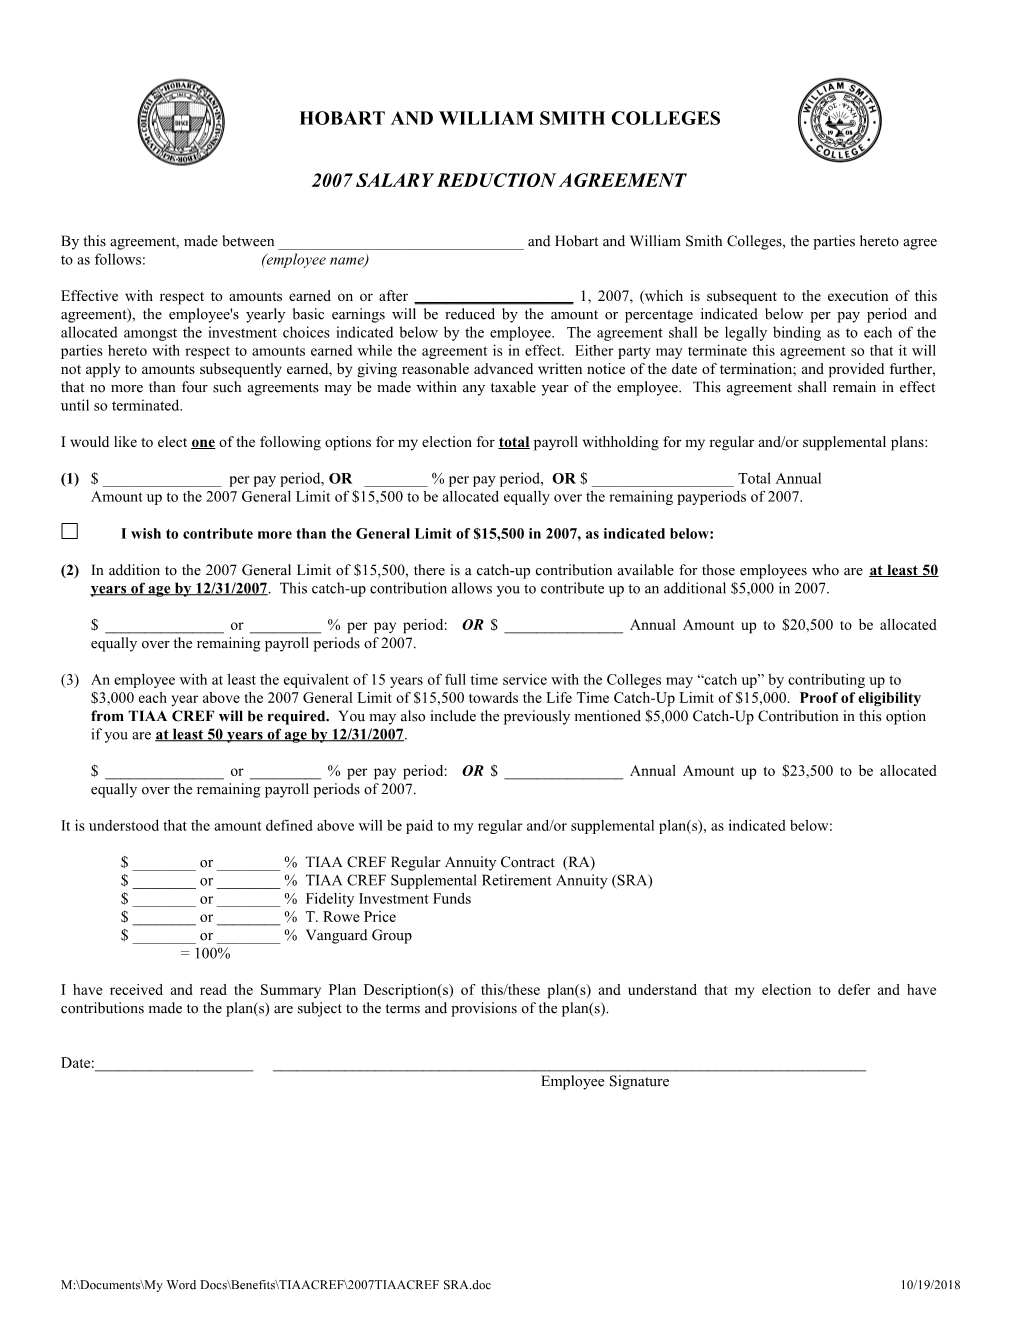 Employee Contribution Election Form